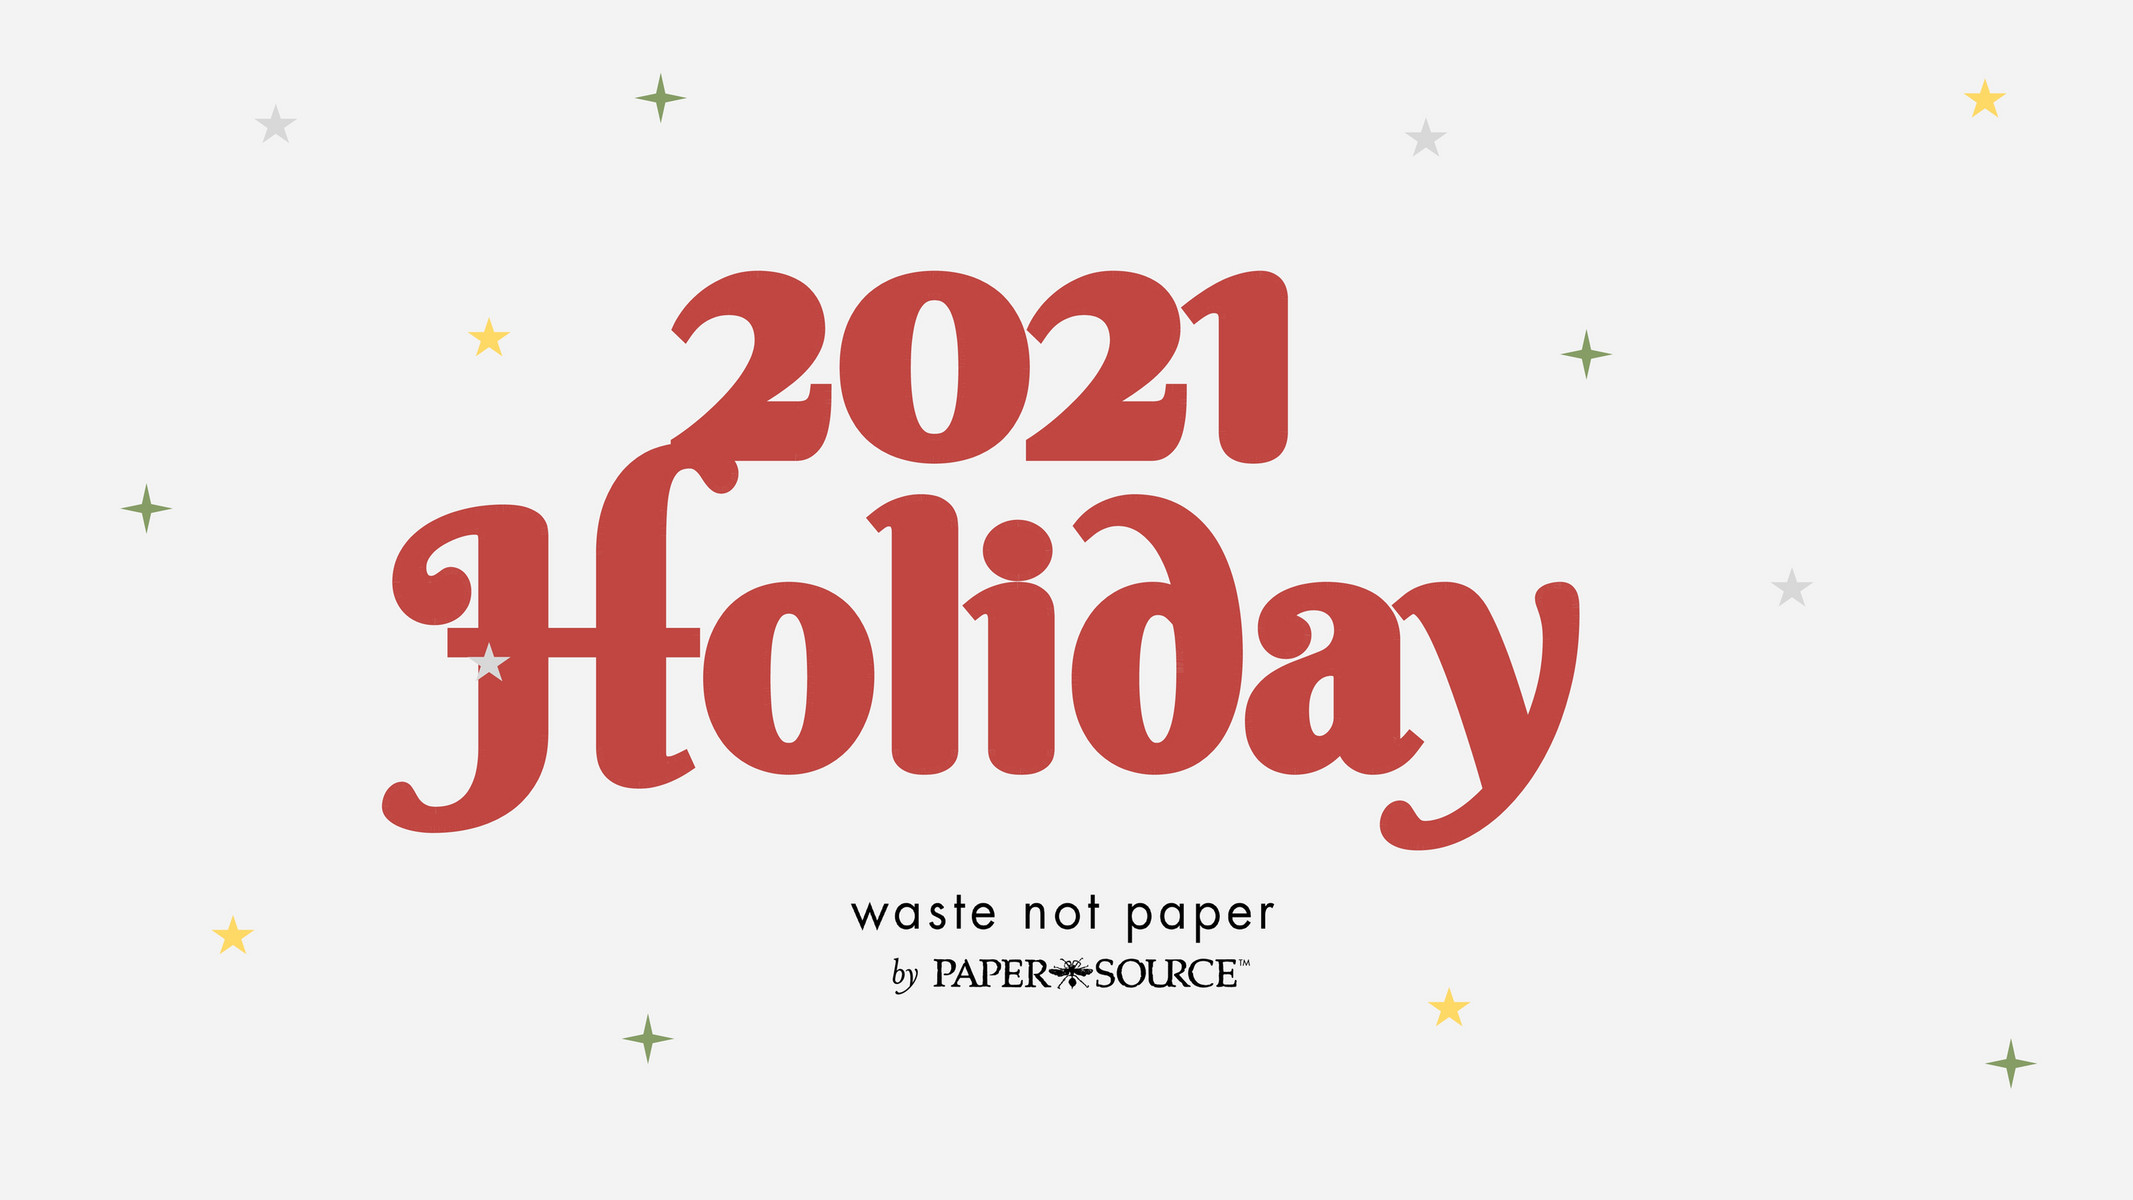 harper-group-waste-not-paper-catalog-holiday-2021-page-1